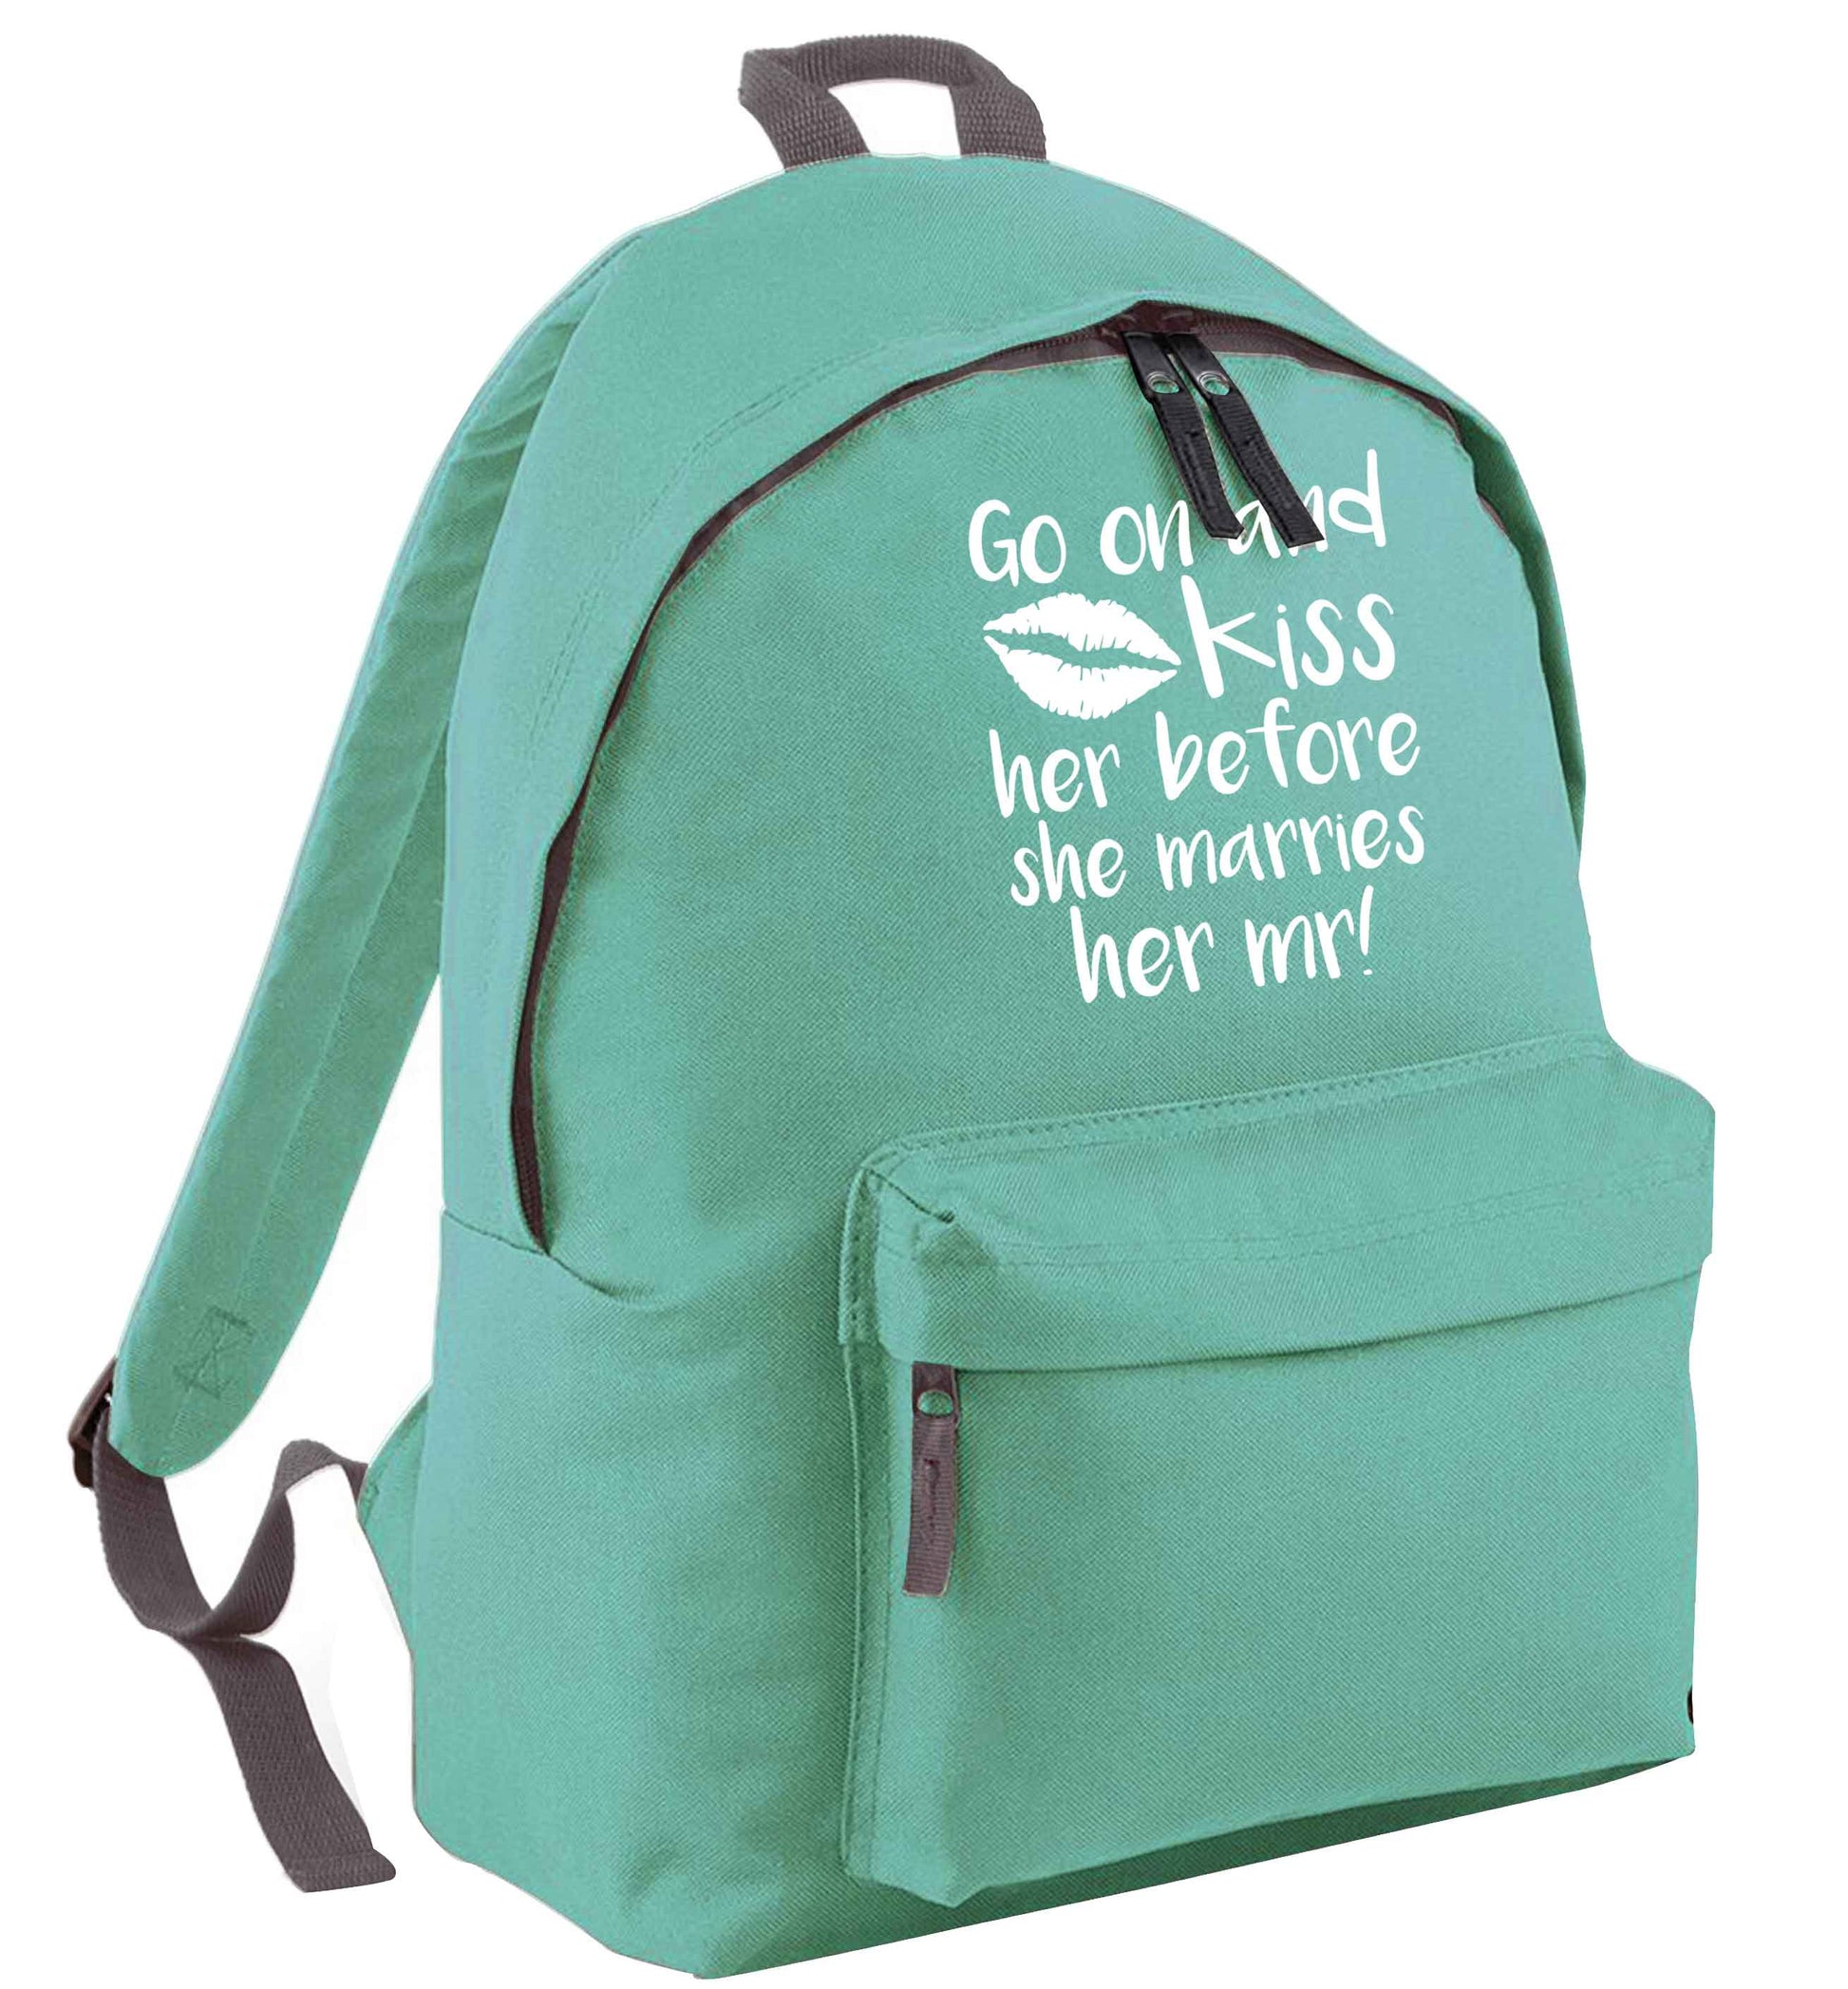 Kiss her before she marries her mr! mint adults backpack